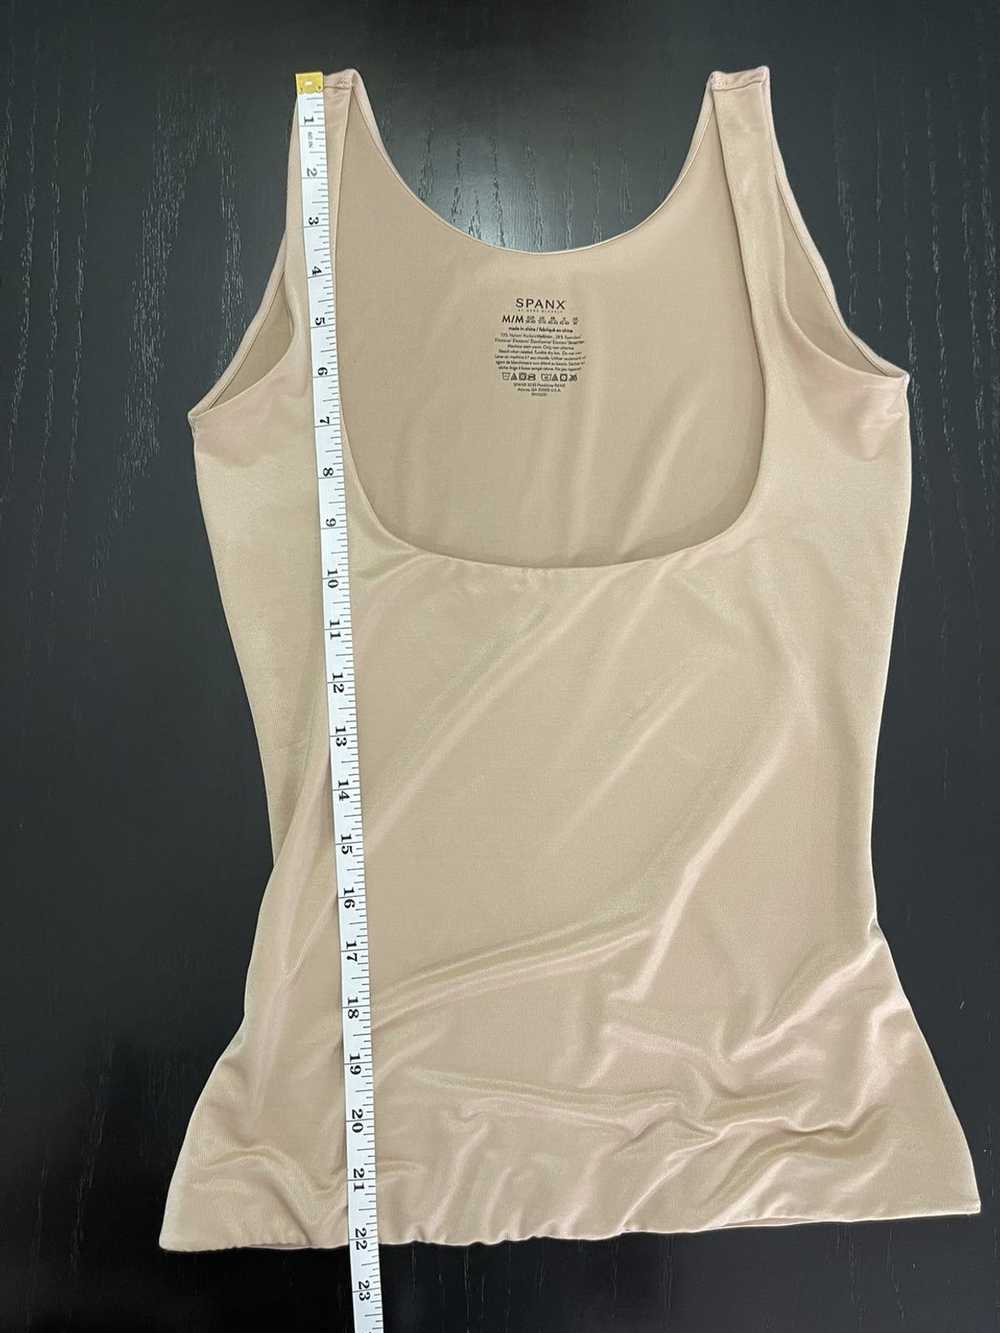 Spanx Spanx Open Front Cami - image 3